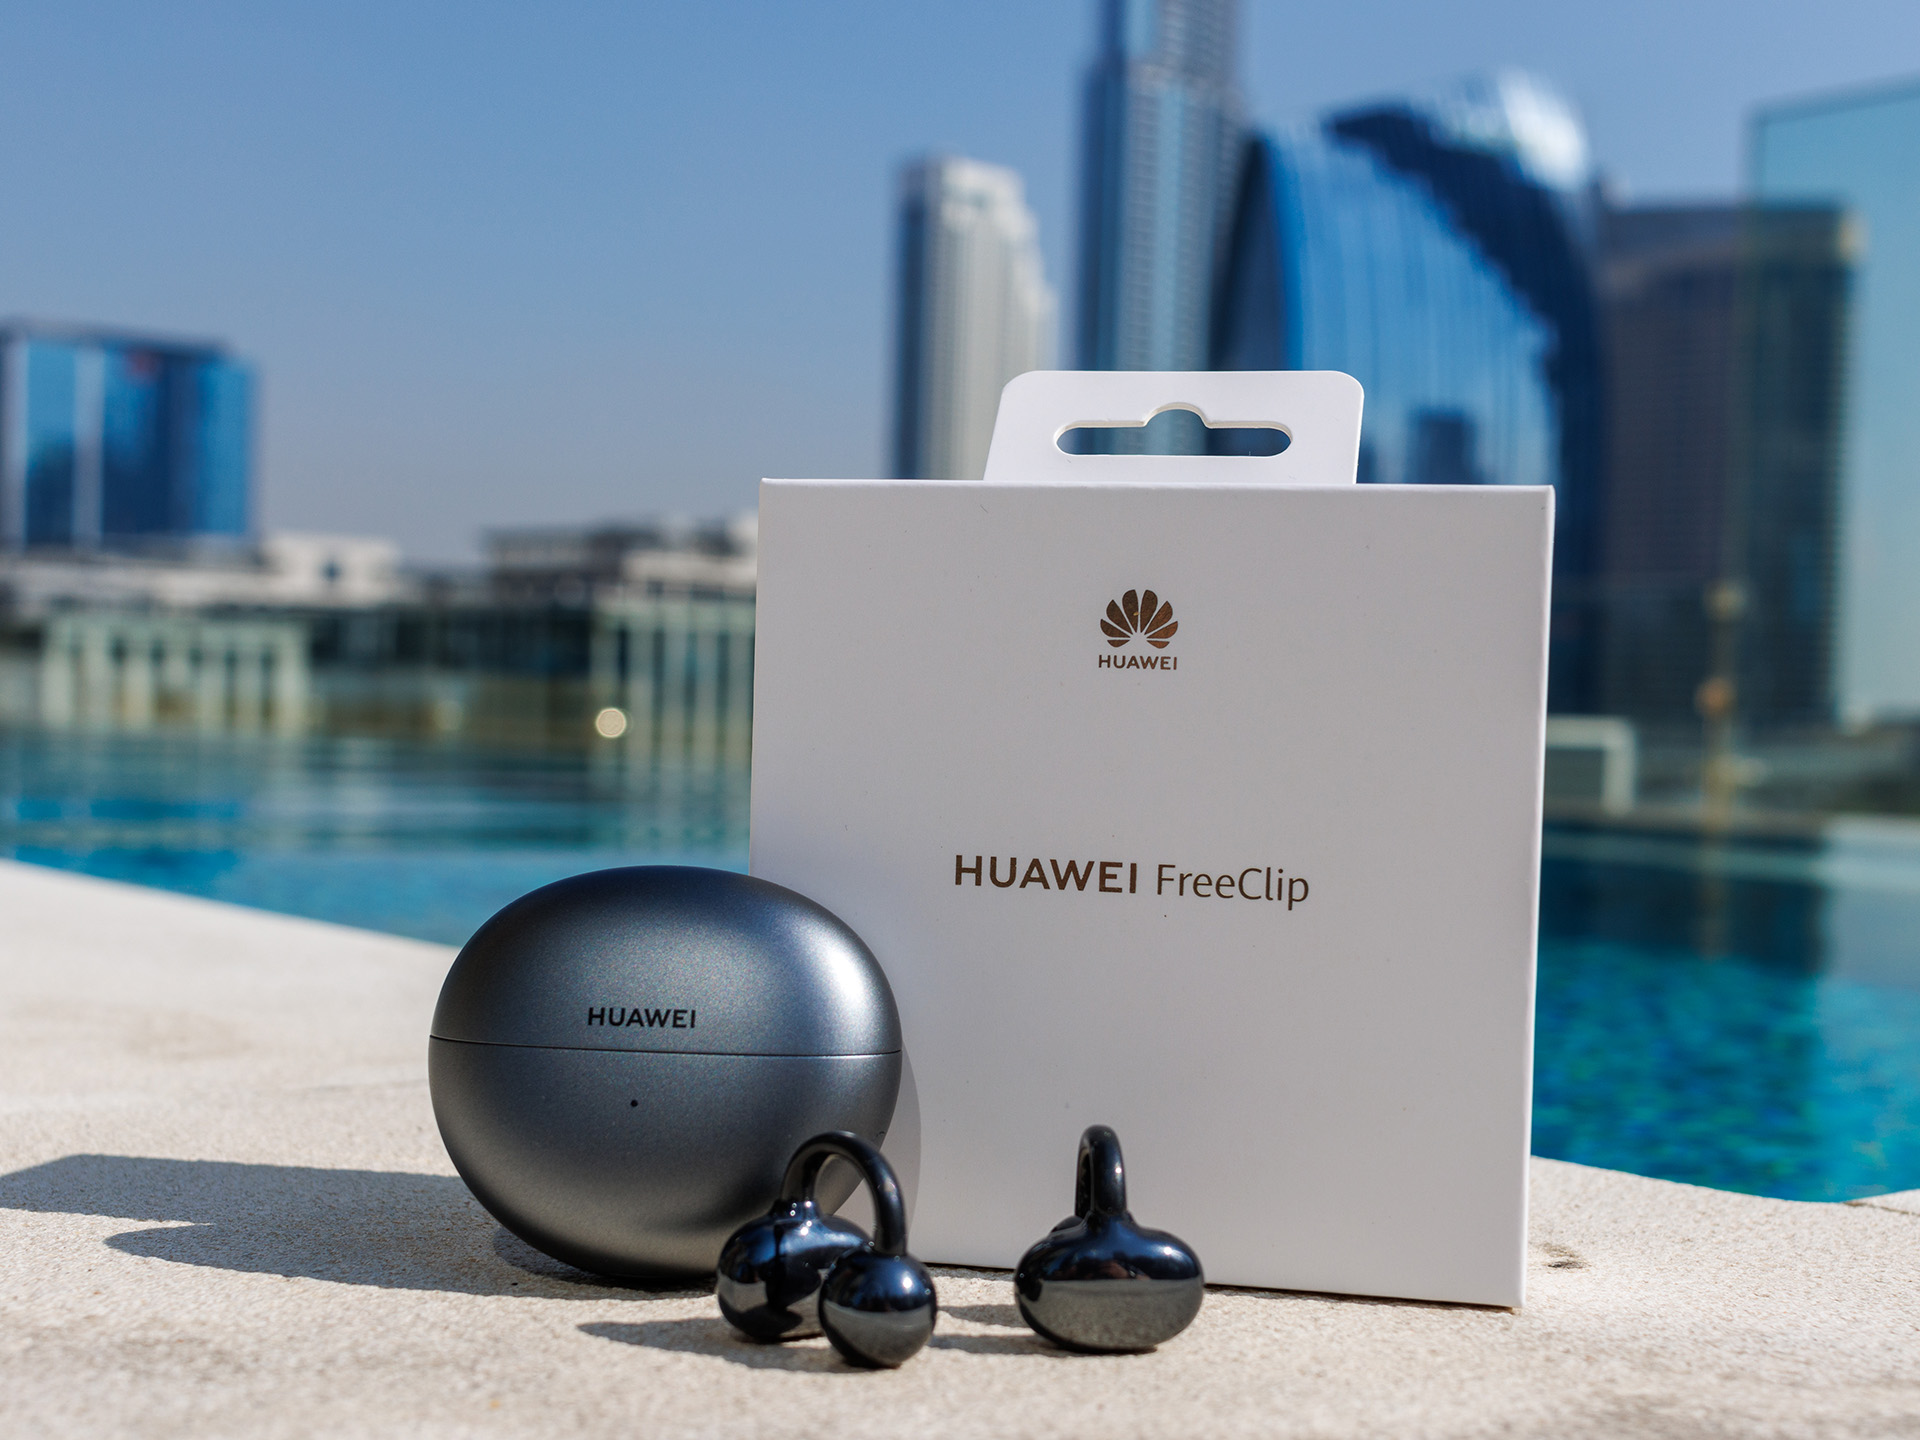 Huawei's first open-back FreeClip headset officially released